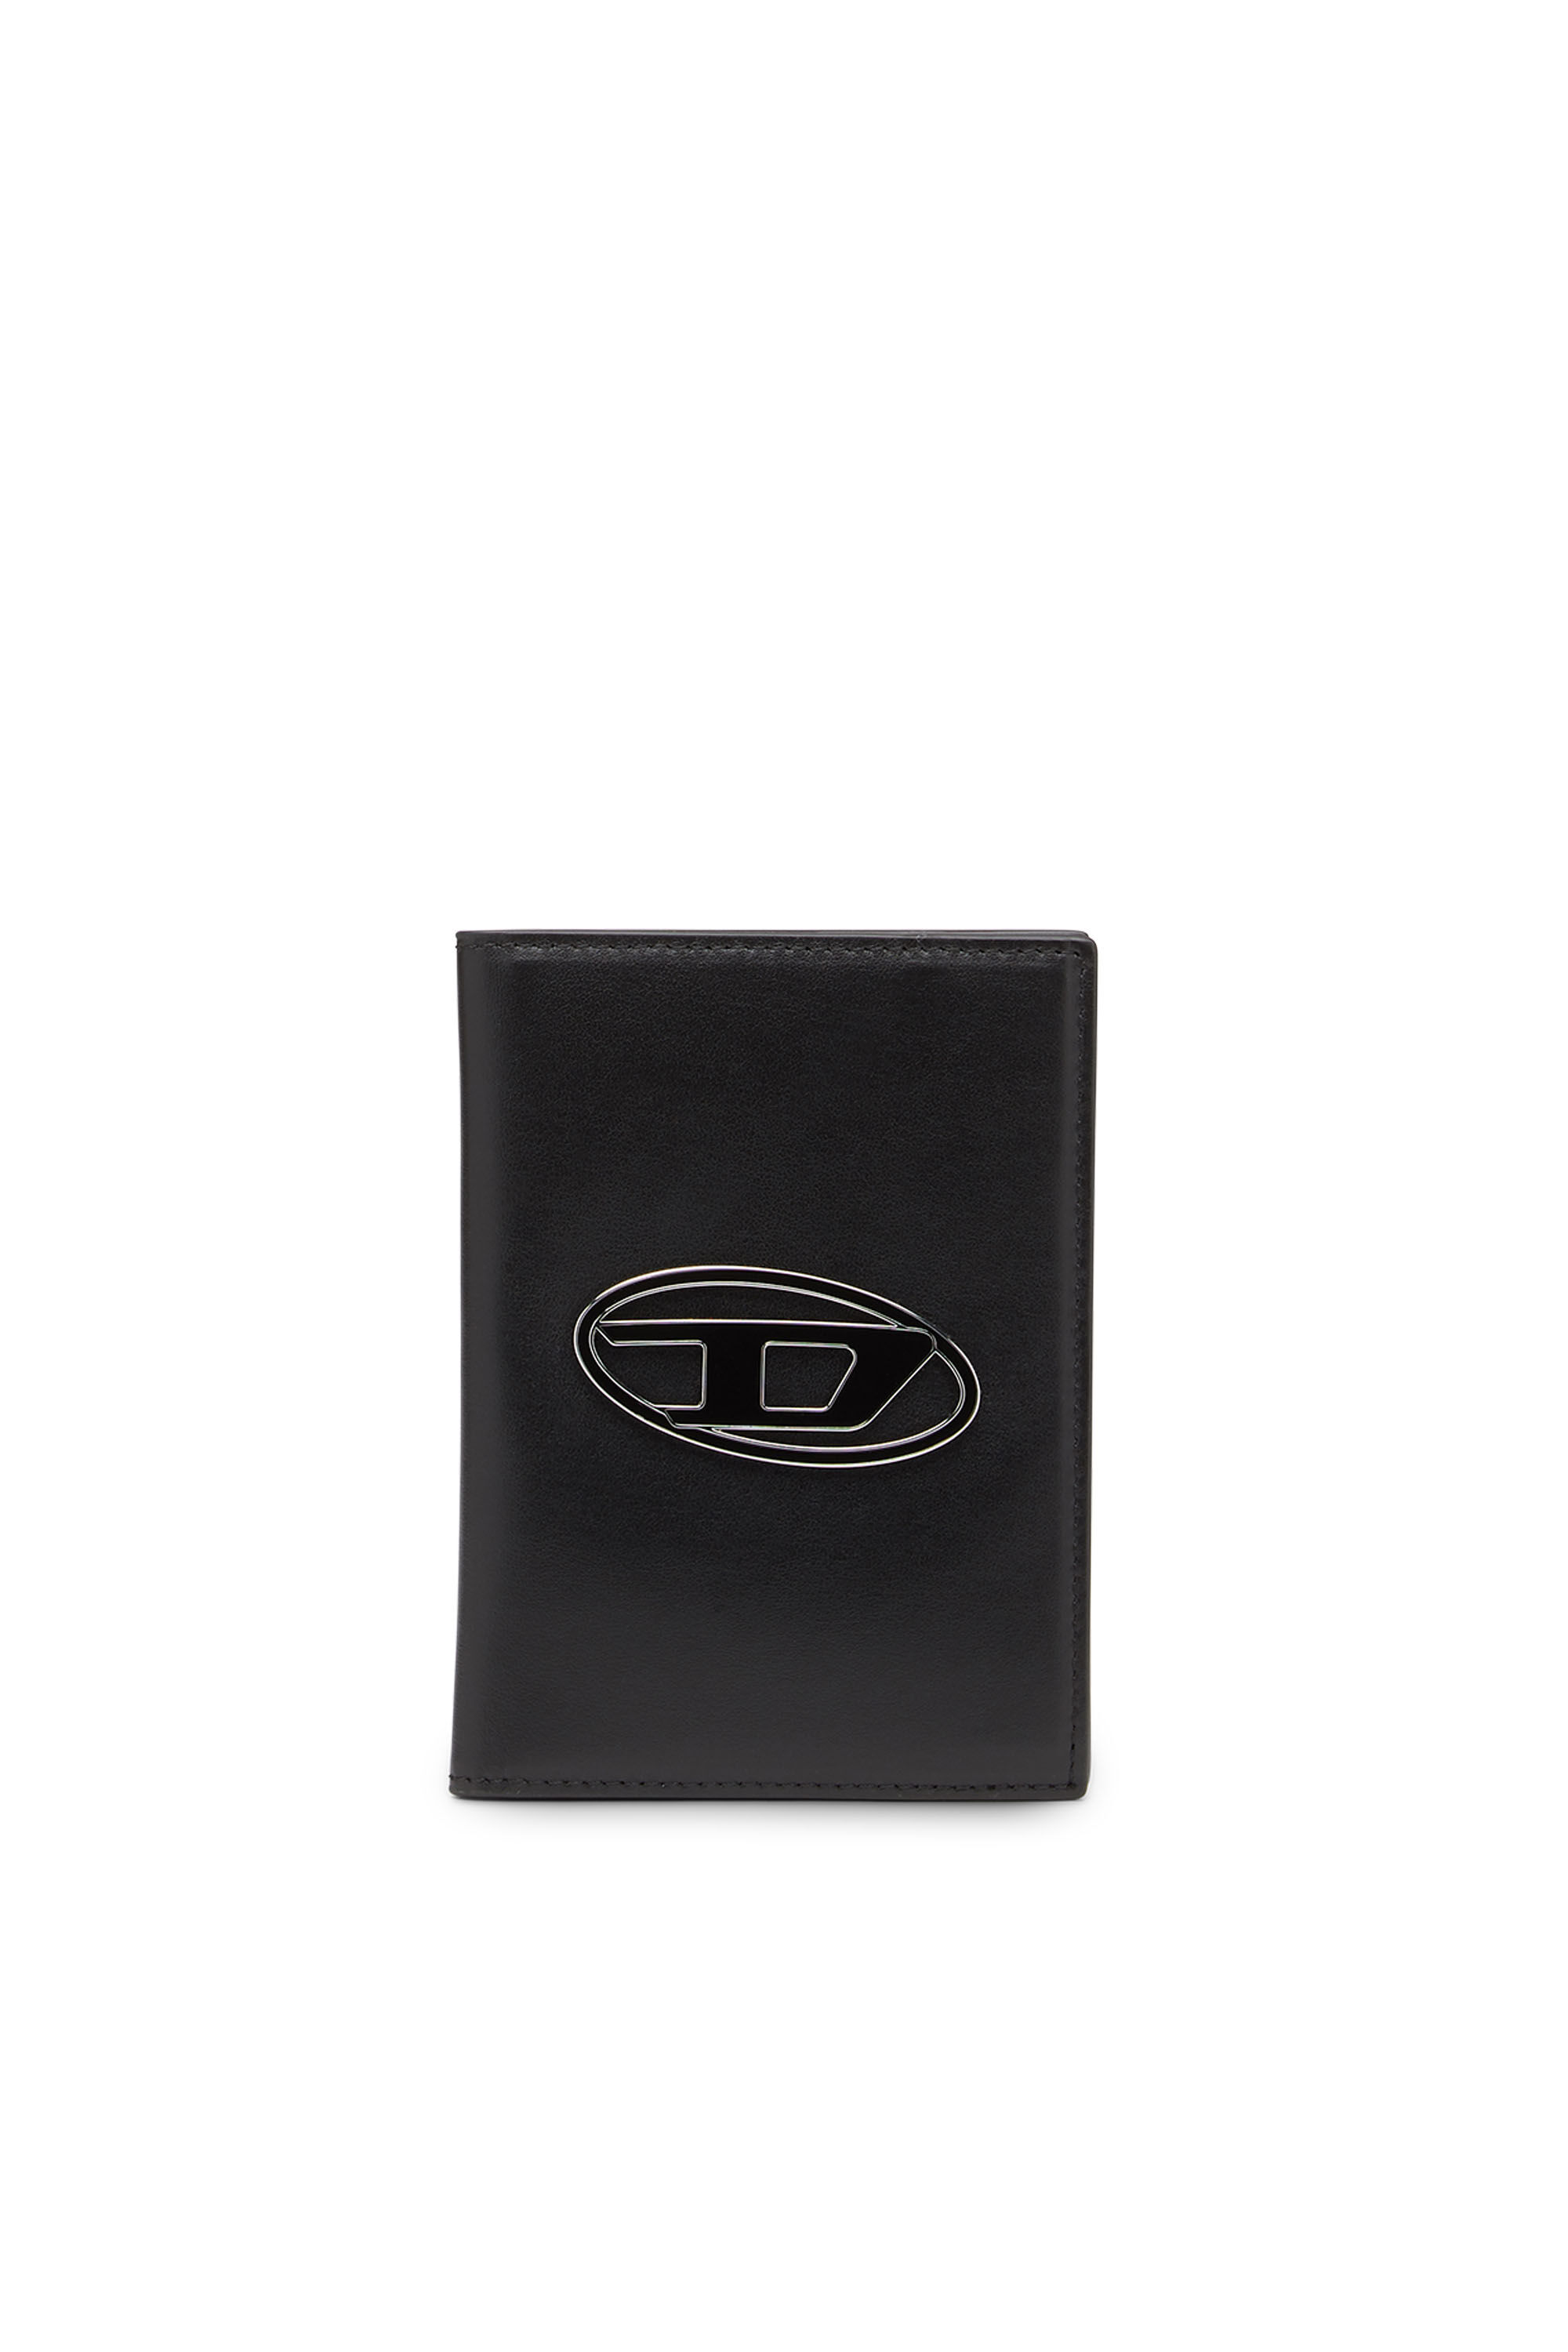 PASCAL Man: Passport holder in nappa leather | Diesel